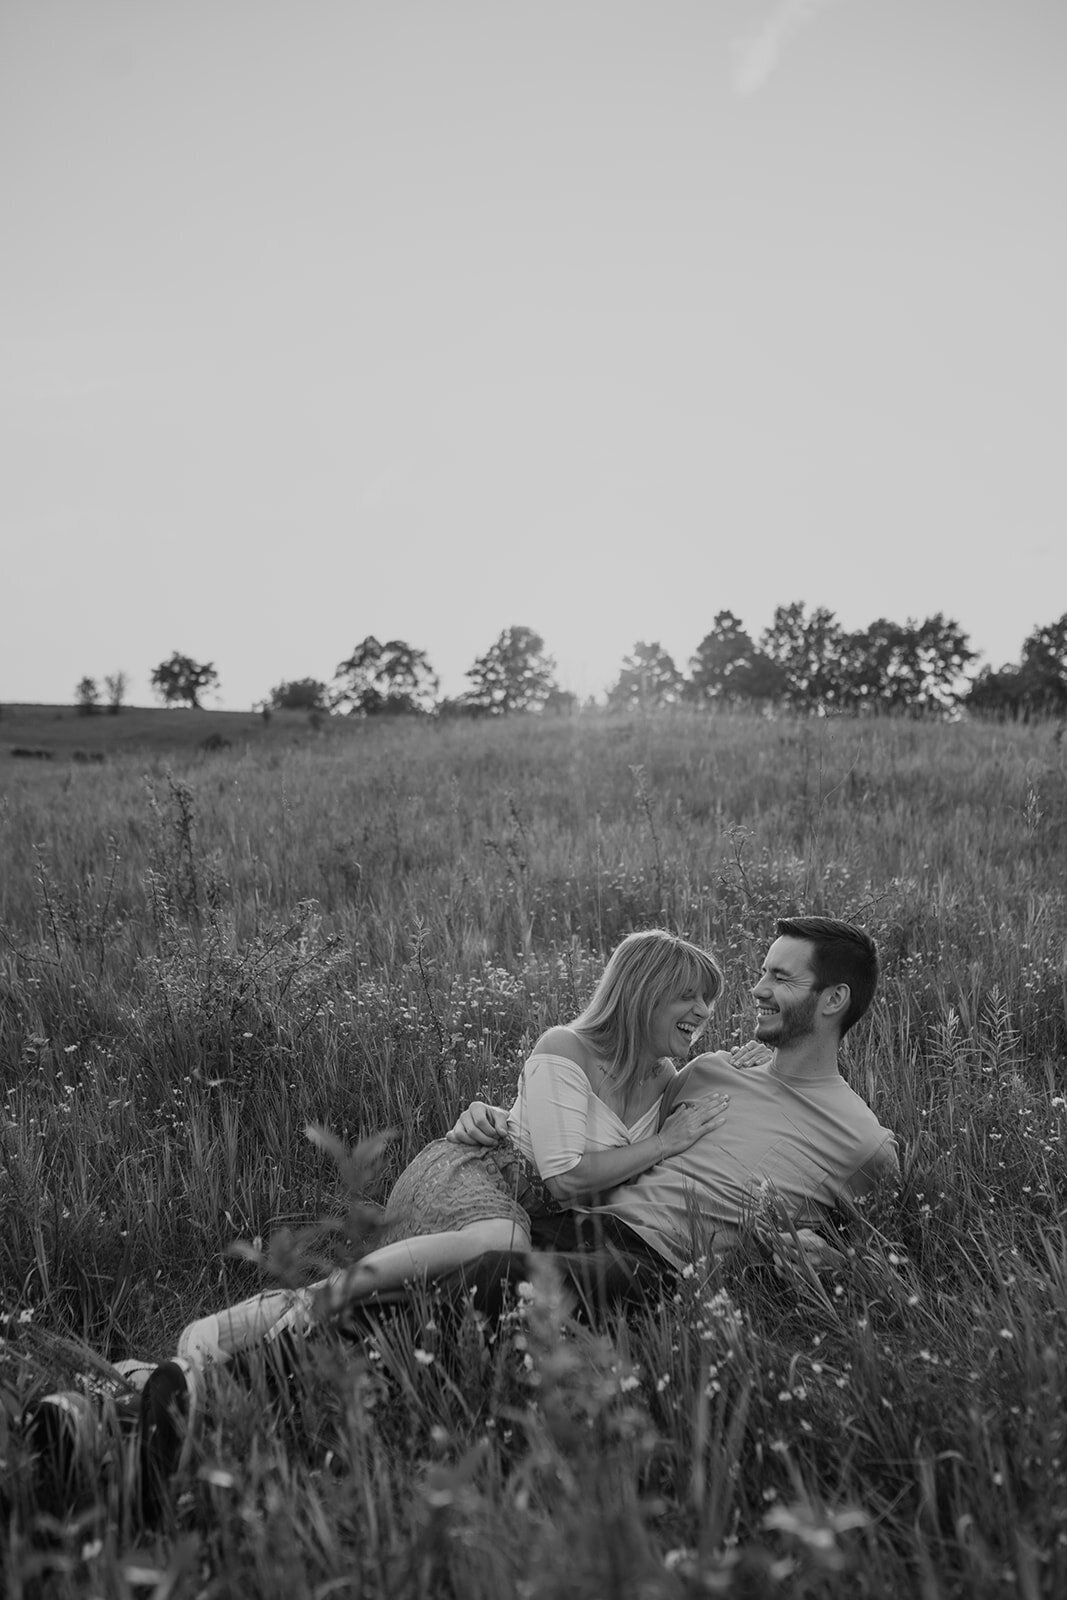 country-cut-flowers-summer-engagement-session-fun-romantic-indie-movie-wanderlust-331